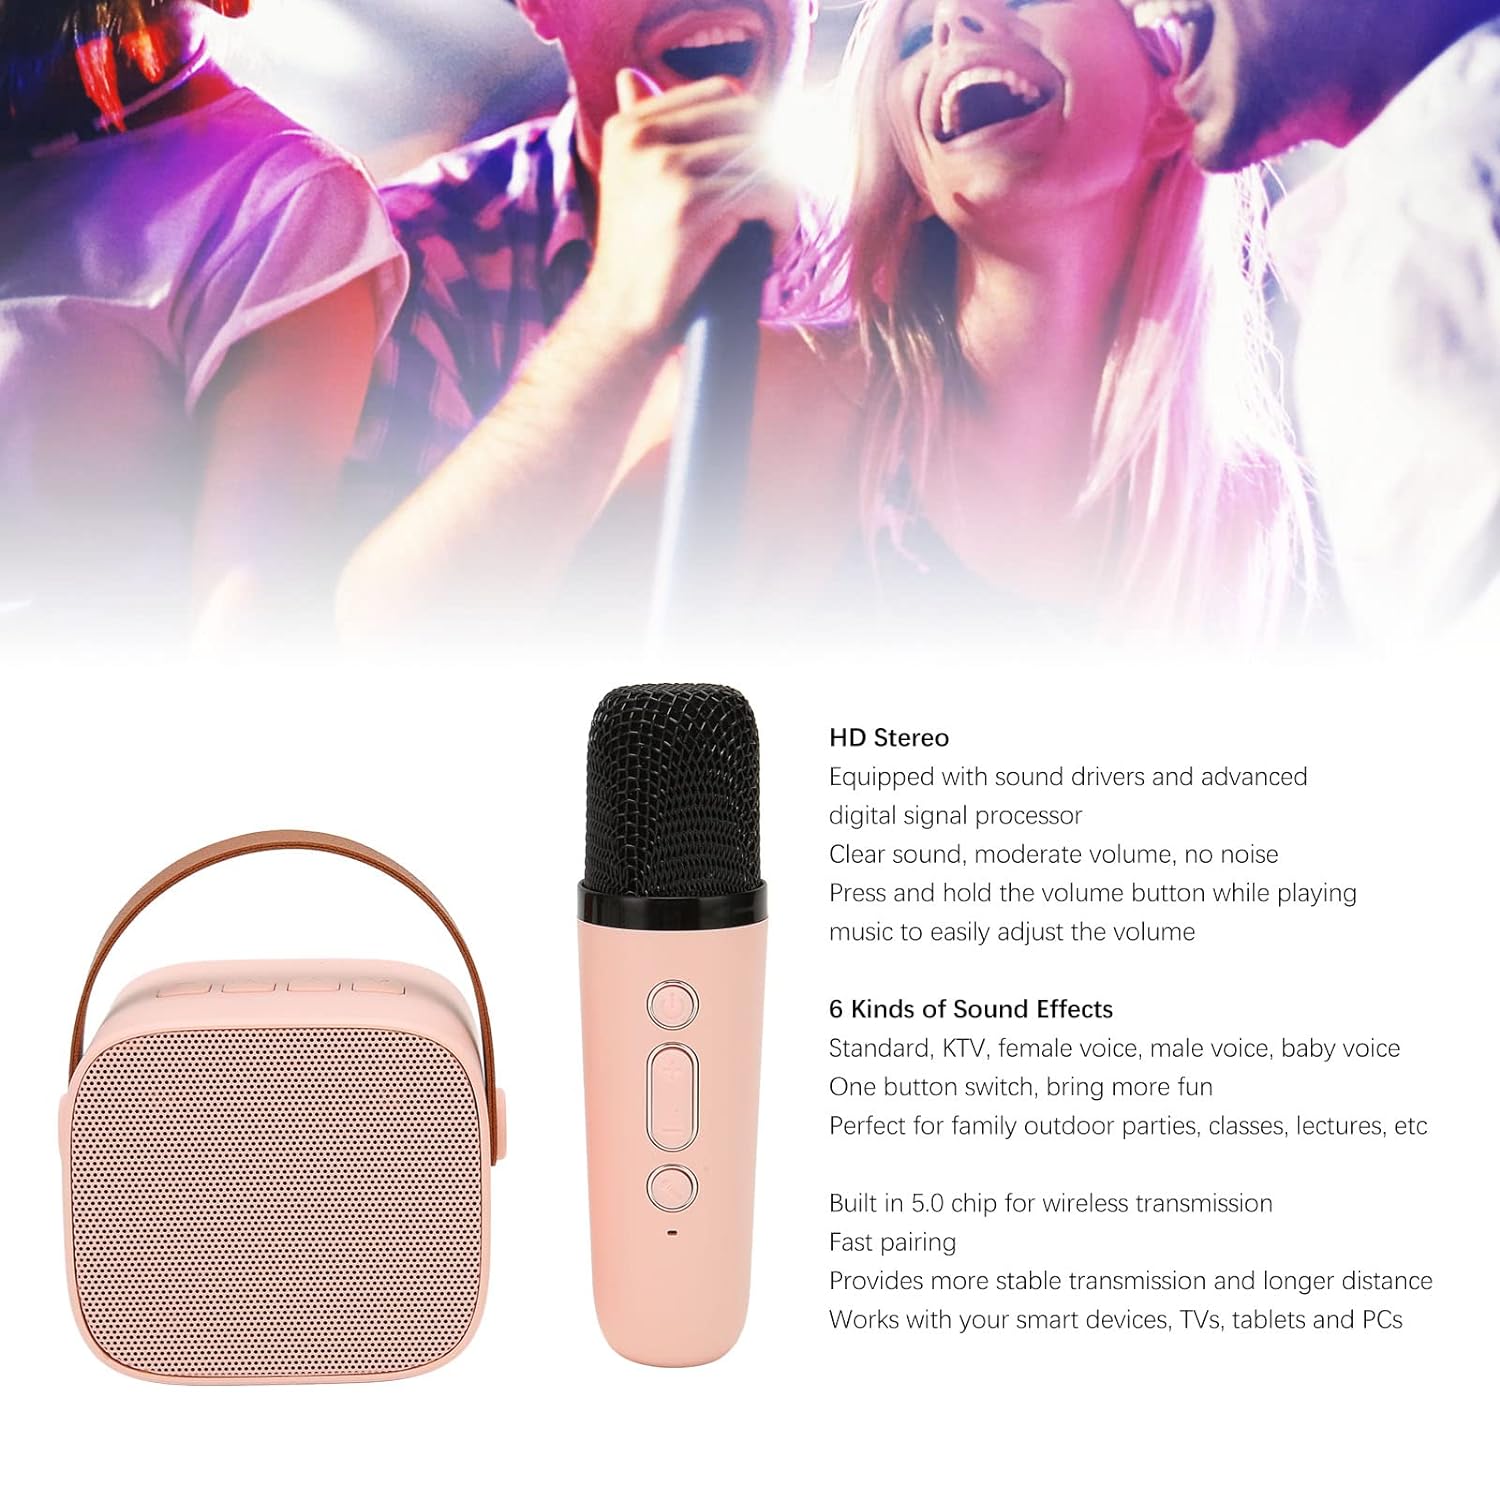 Shanrya Microphone Set with Speaker, Stable Adjustable Volume, Portable Karaoke Machine, Rechargeable, HD Stereo, 6 Sound Effects for Parties for Kids (Pink)